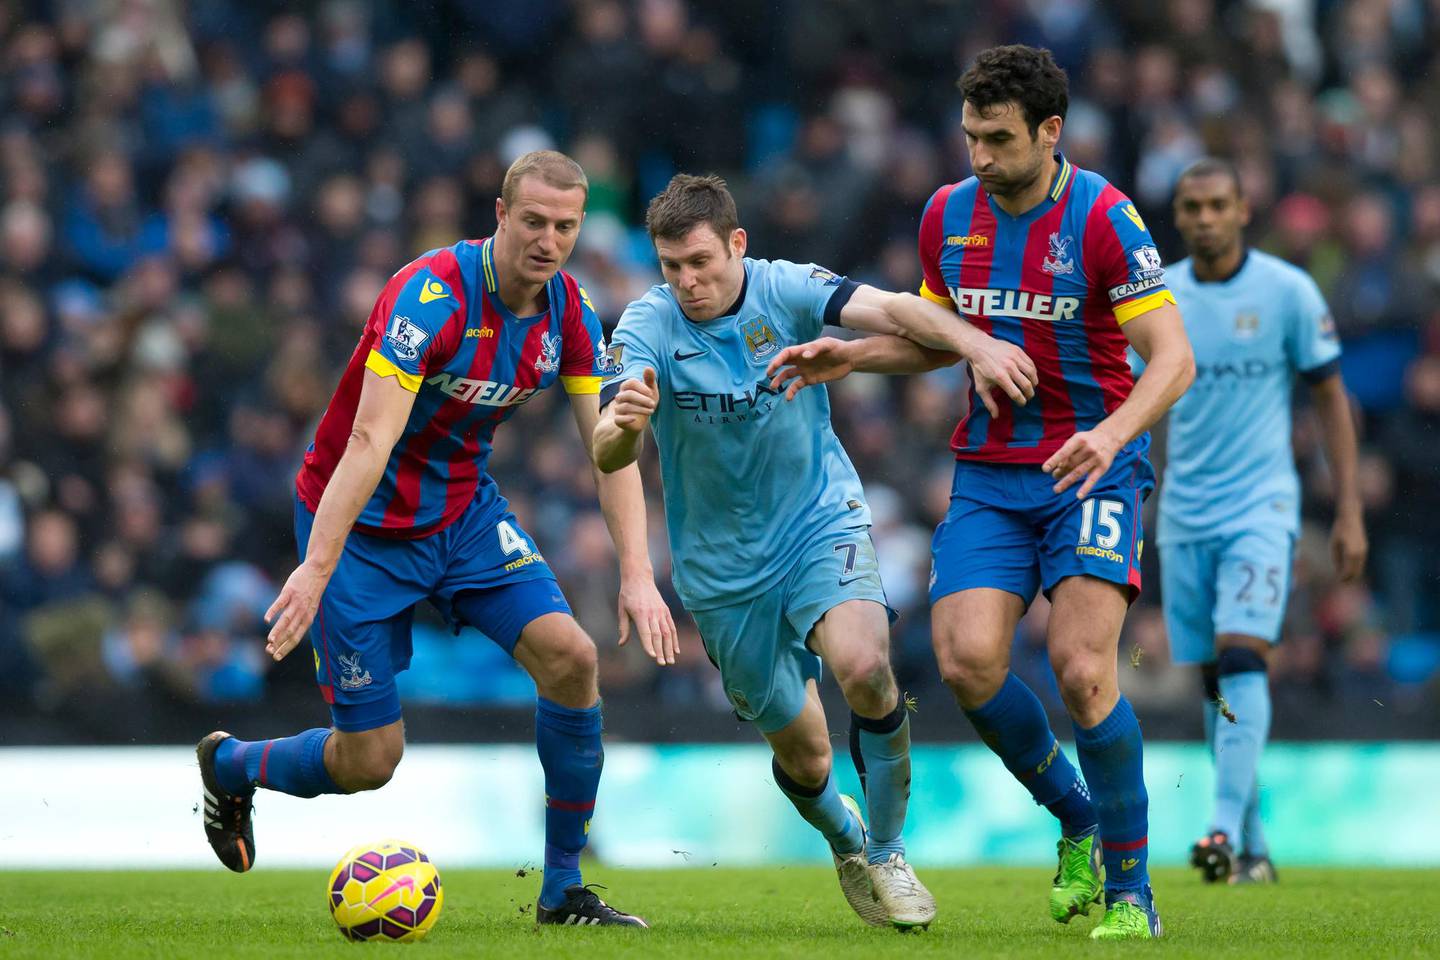 Manchester City's James Milner, centre, fights for the ball against Crystal Palace's Mile Jedinak, right, and Brede Hangeland during the English Premier League soccer match between Manchester City and Crystal Palace at the Etihad Stadium, Manchester, England, Saturday Dec. 20, 2014. (AP Photo/Jon Super)  